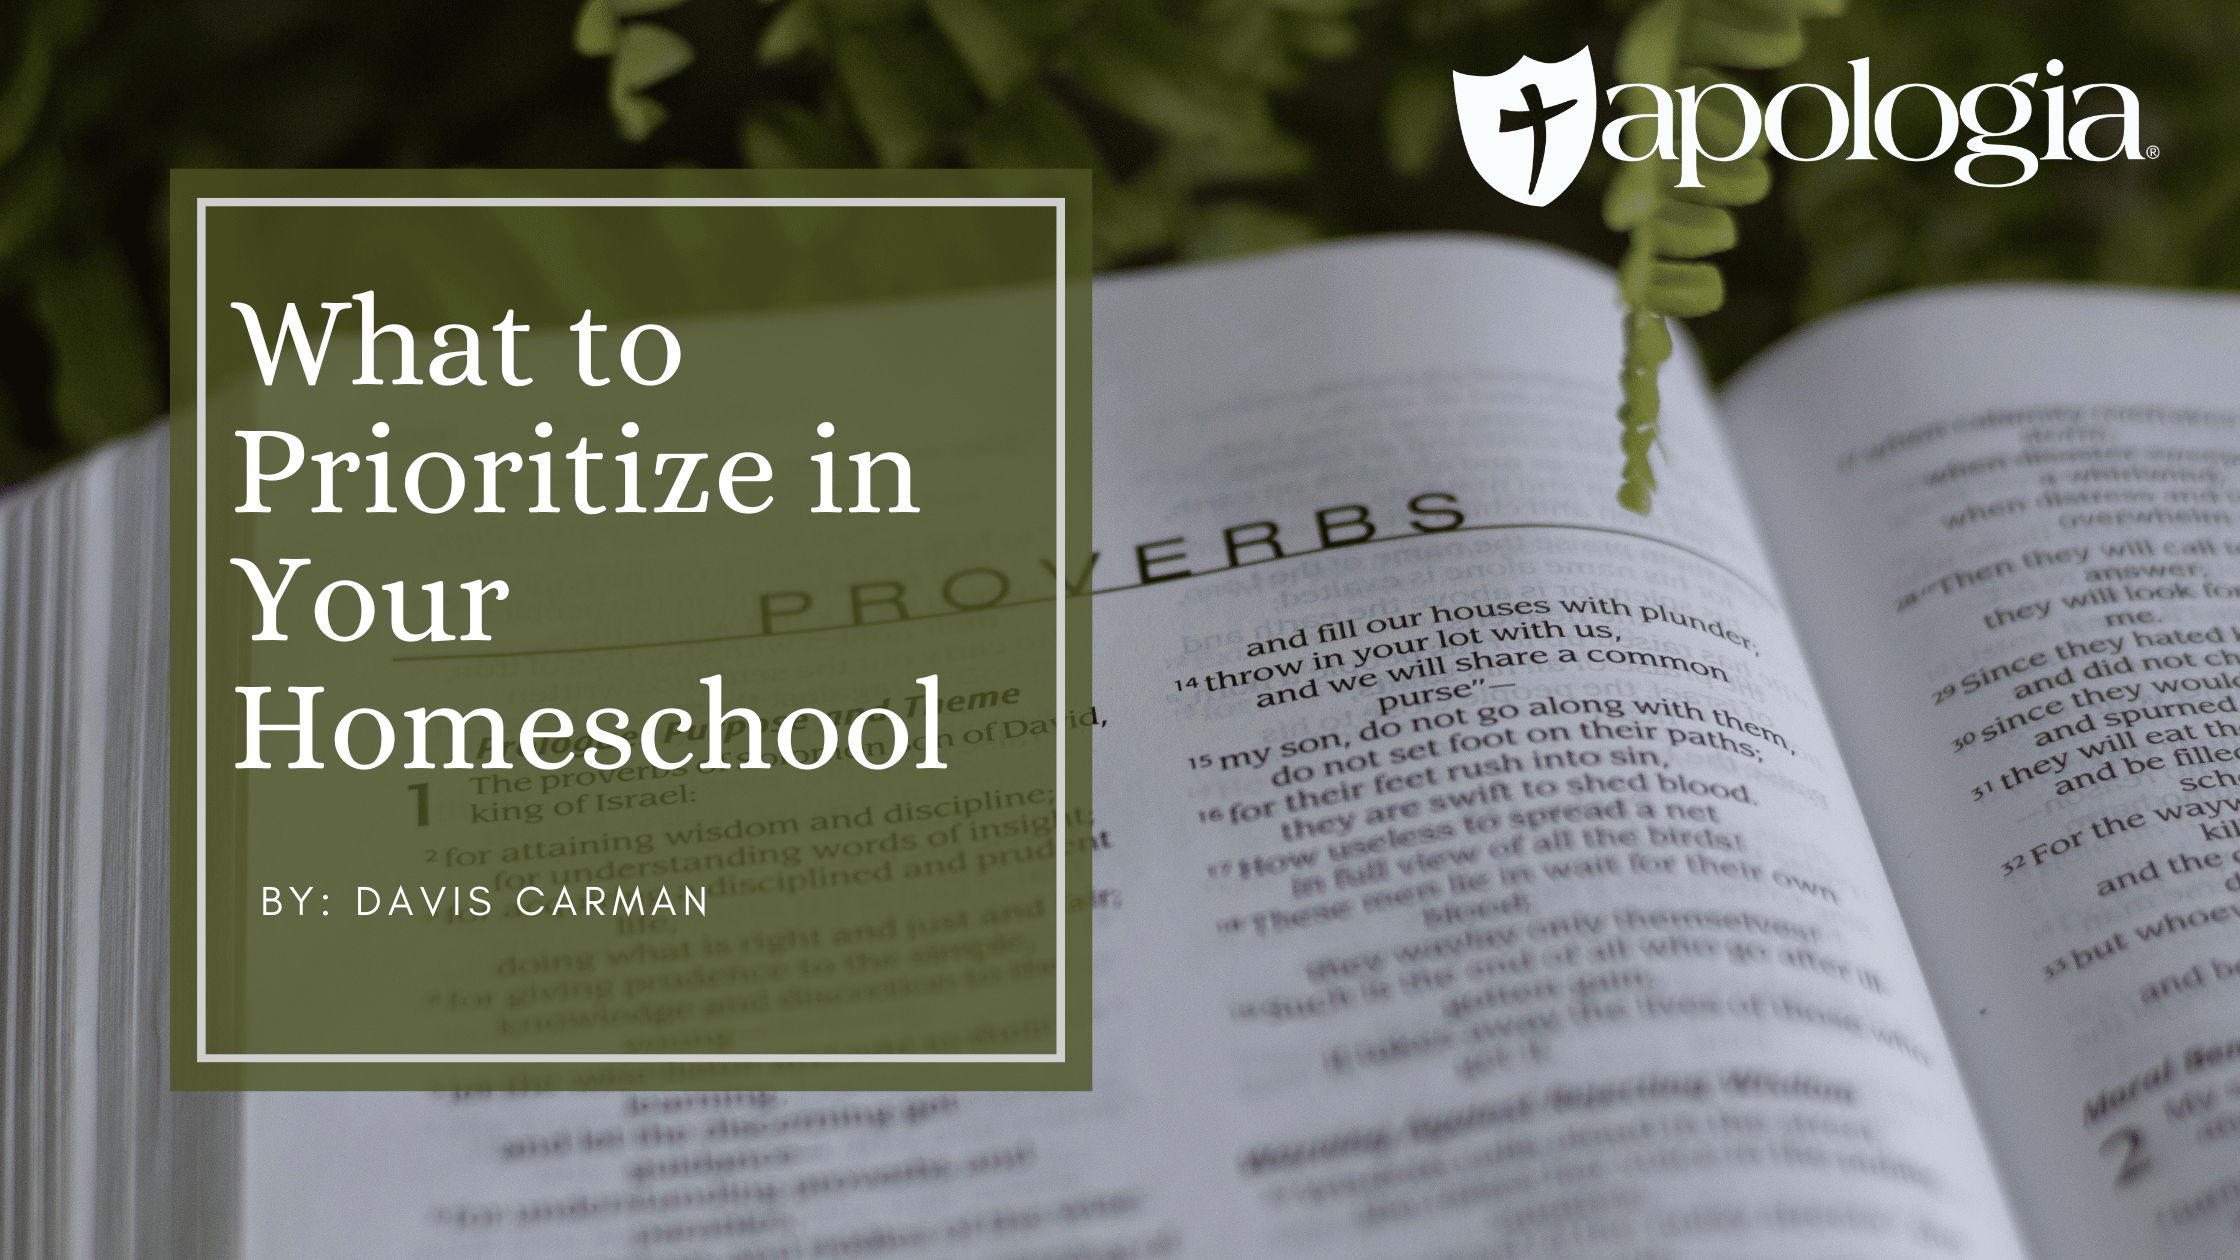 What to Prioritize in Your Homeschool?